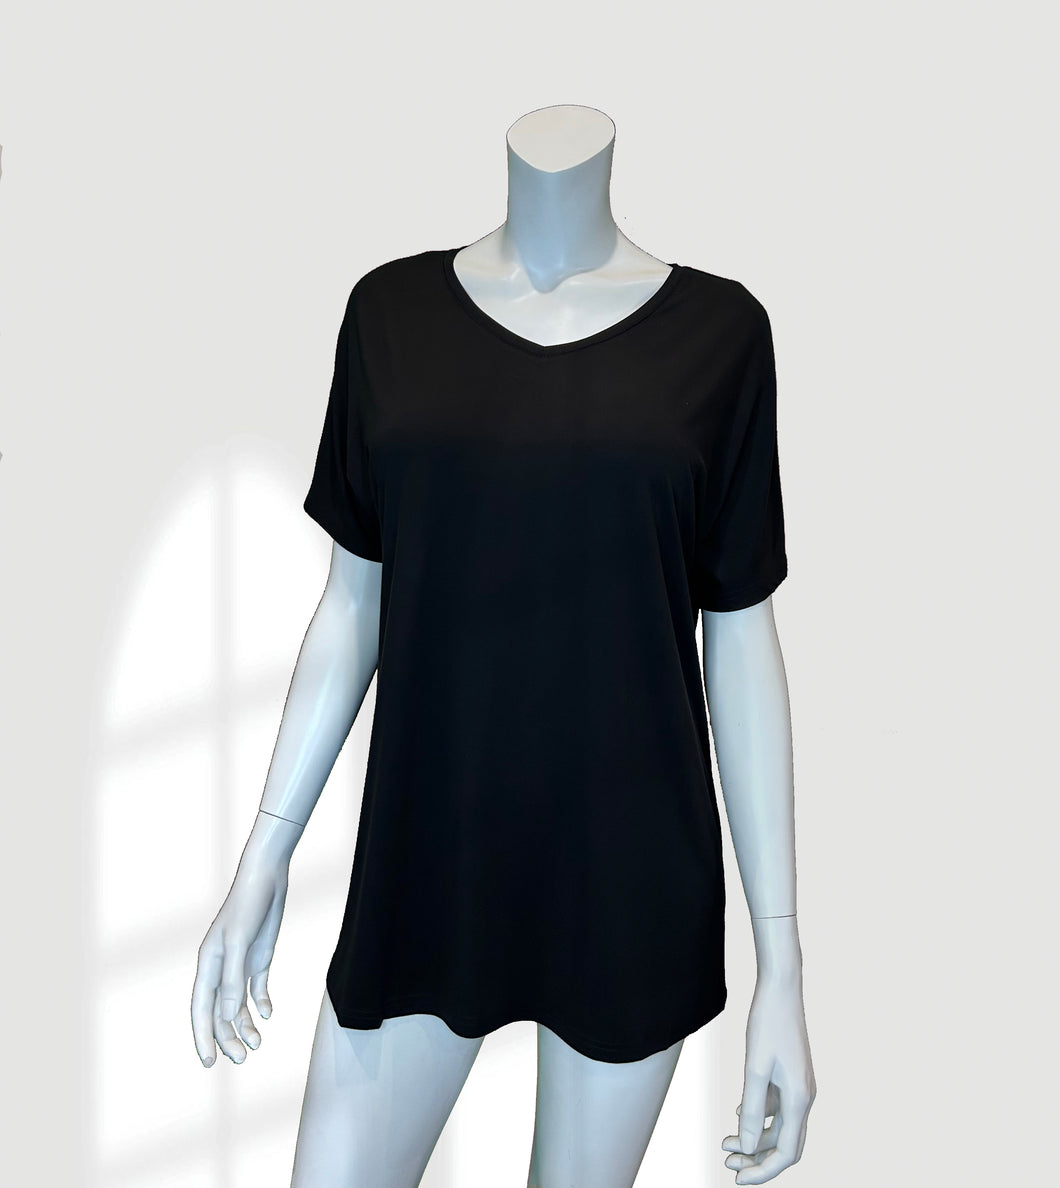 RULES Black Bamboo Lounge Top - Front view with no pregnancy bump